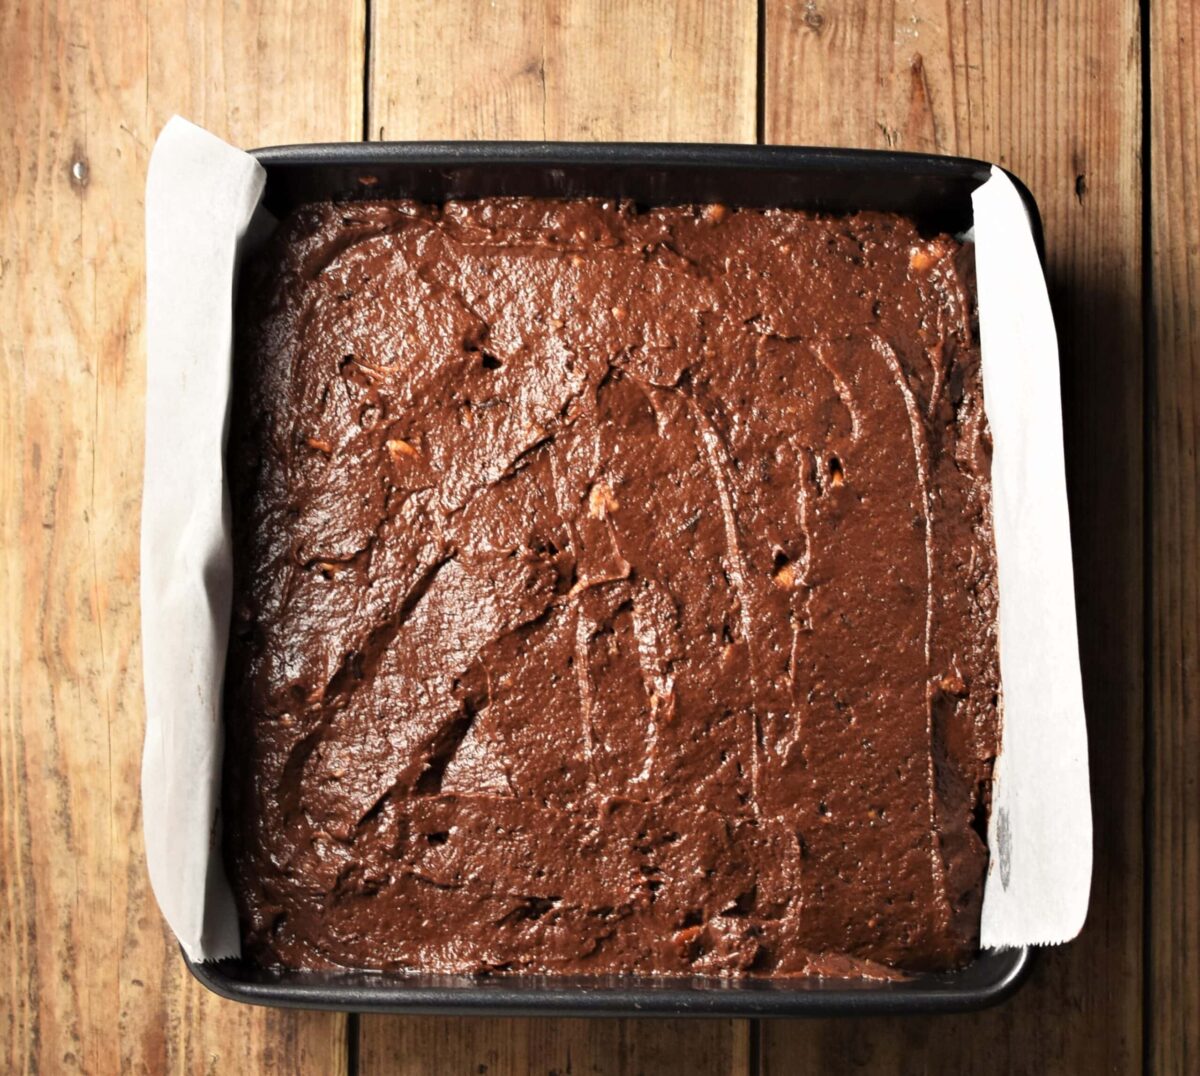 Brownie cake batter in square pan lined with parchment paper.